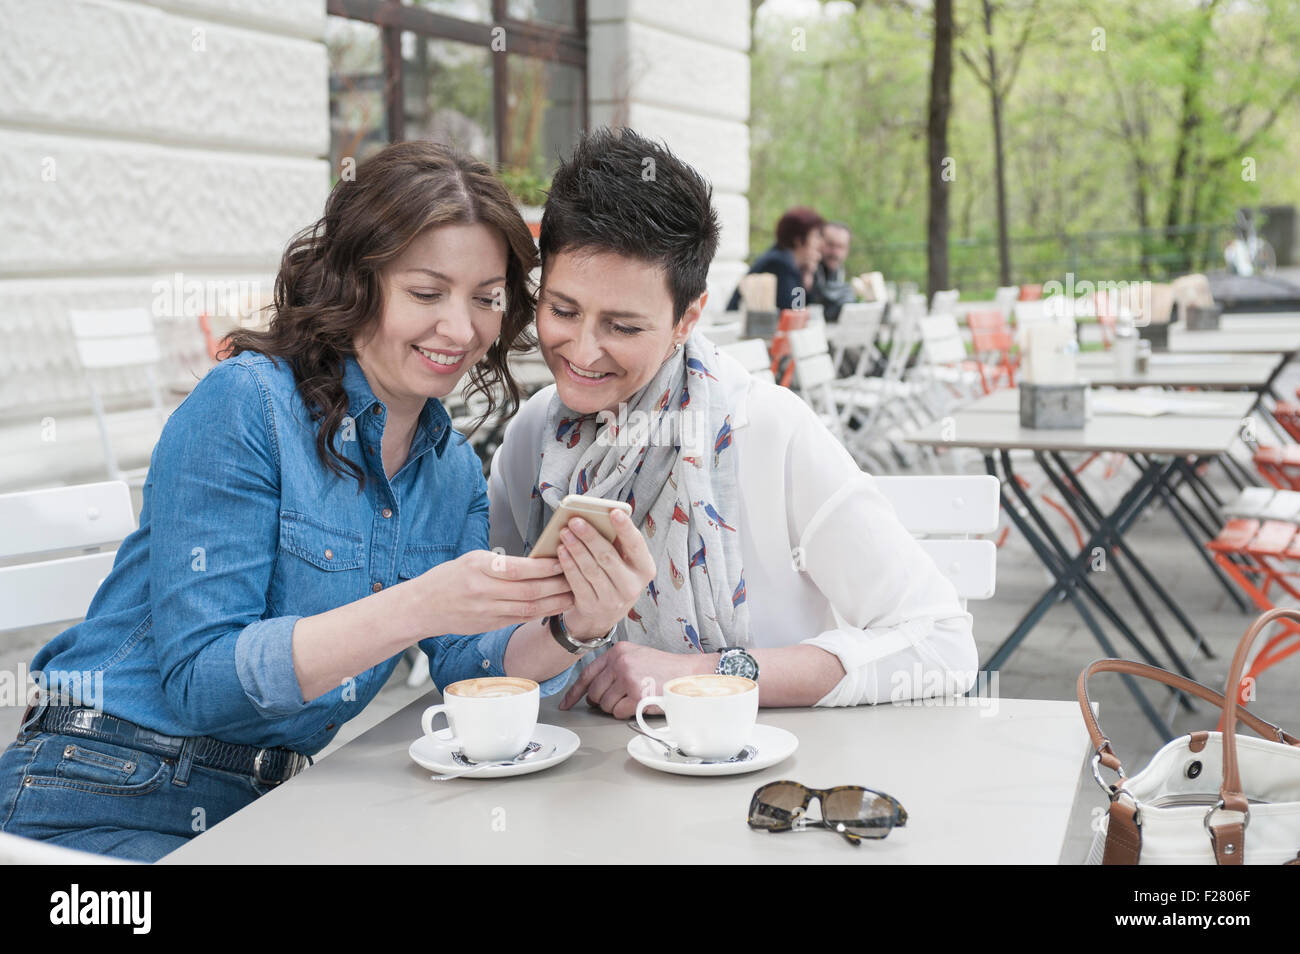 Two friends in the sidewalk cafe looking at phone, Bavaria, Germany Stock Photo